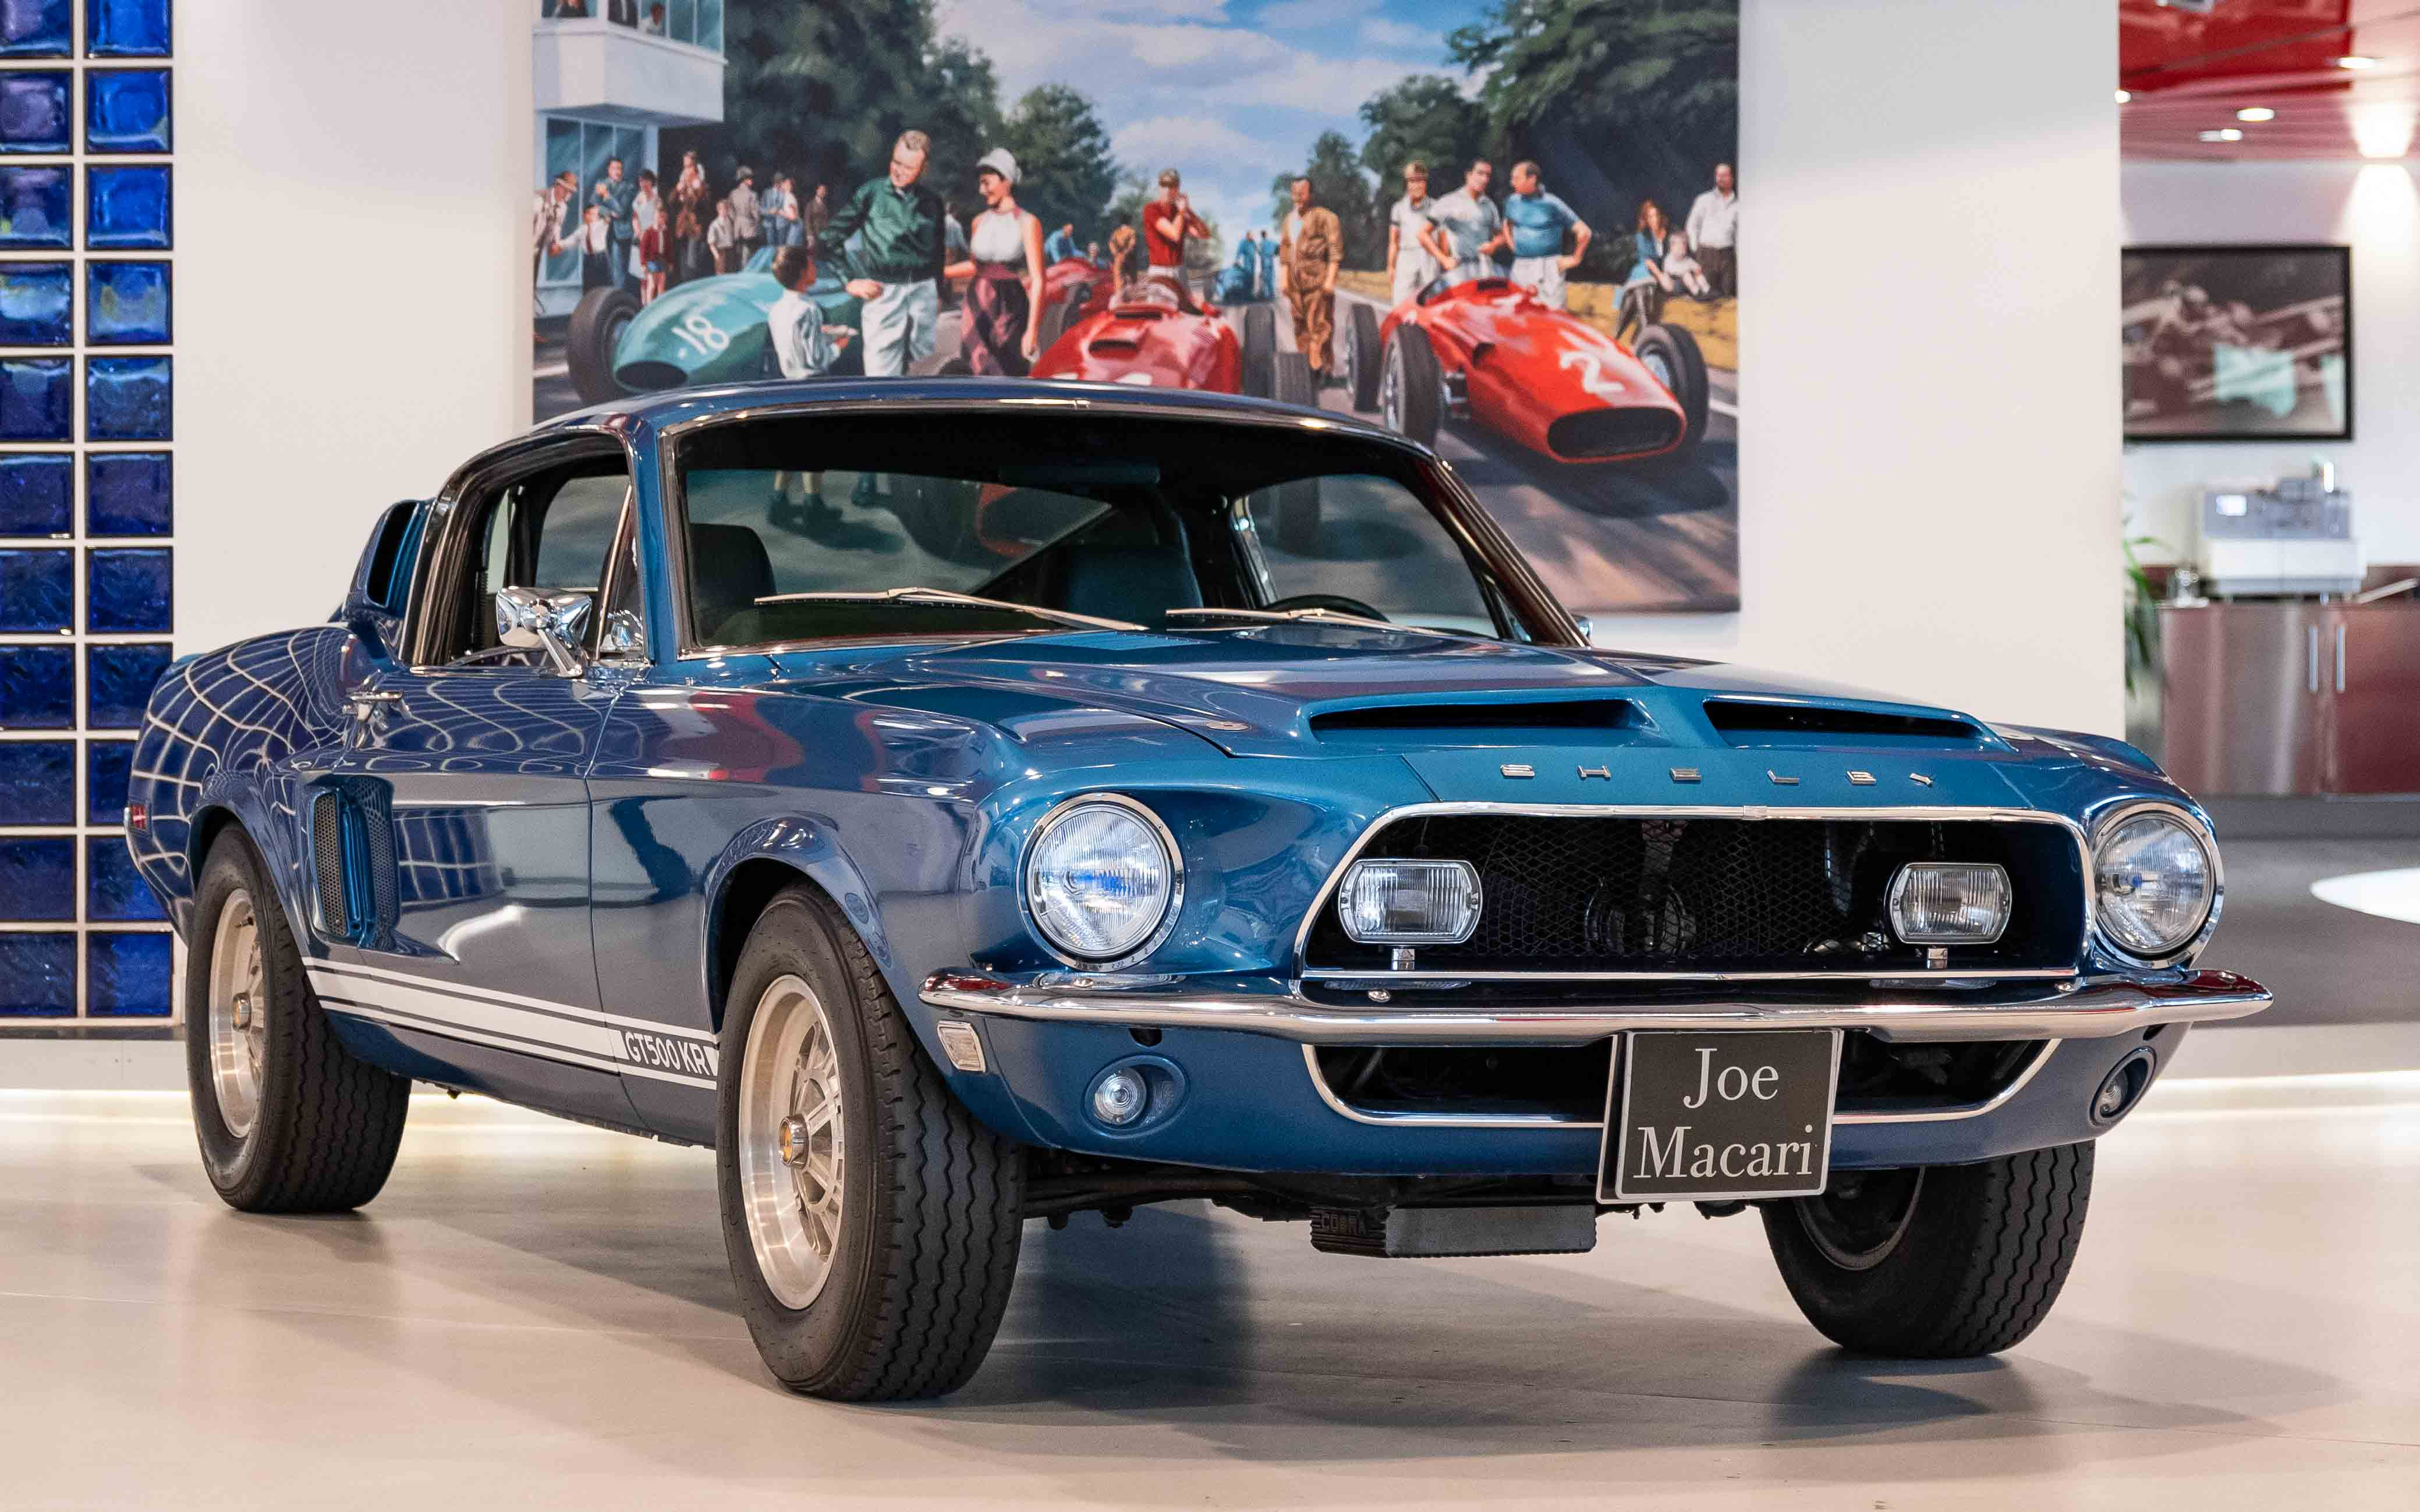 1968 Ford Mustang Shelby Gt500 Kr Vintage Car For Sale